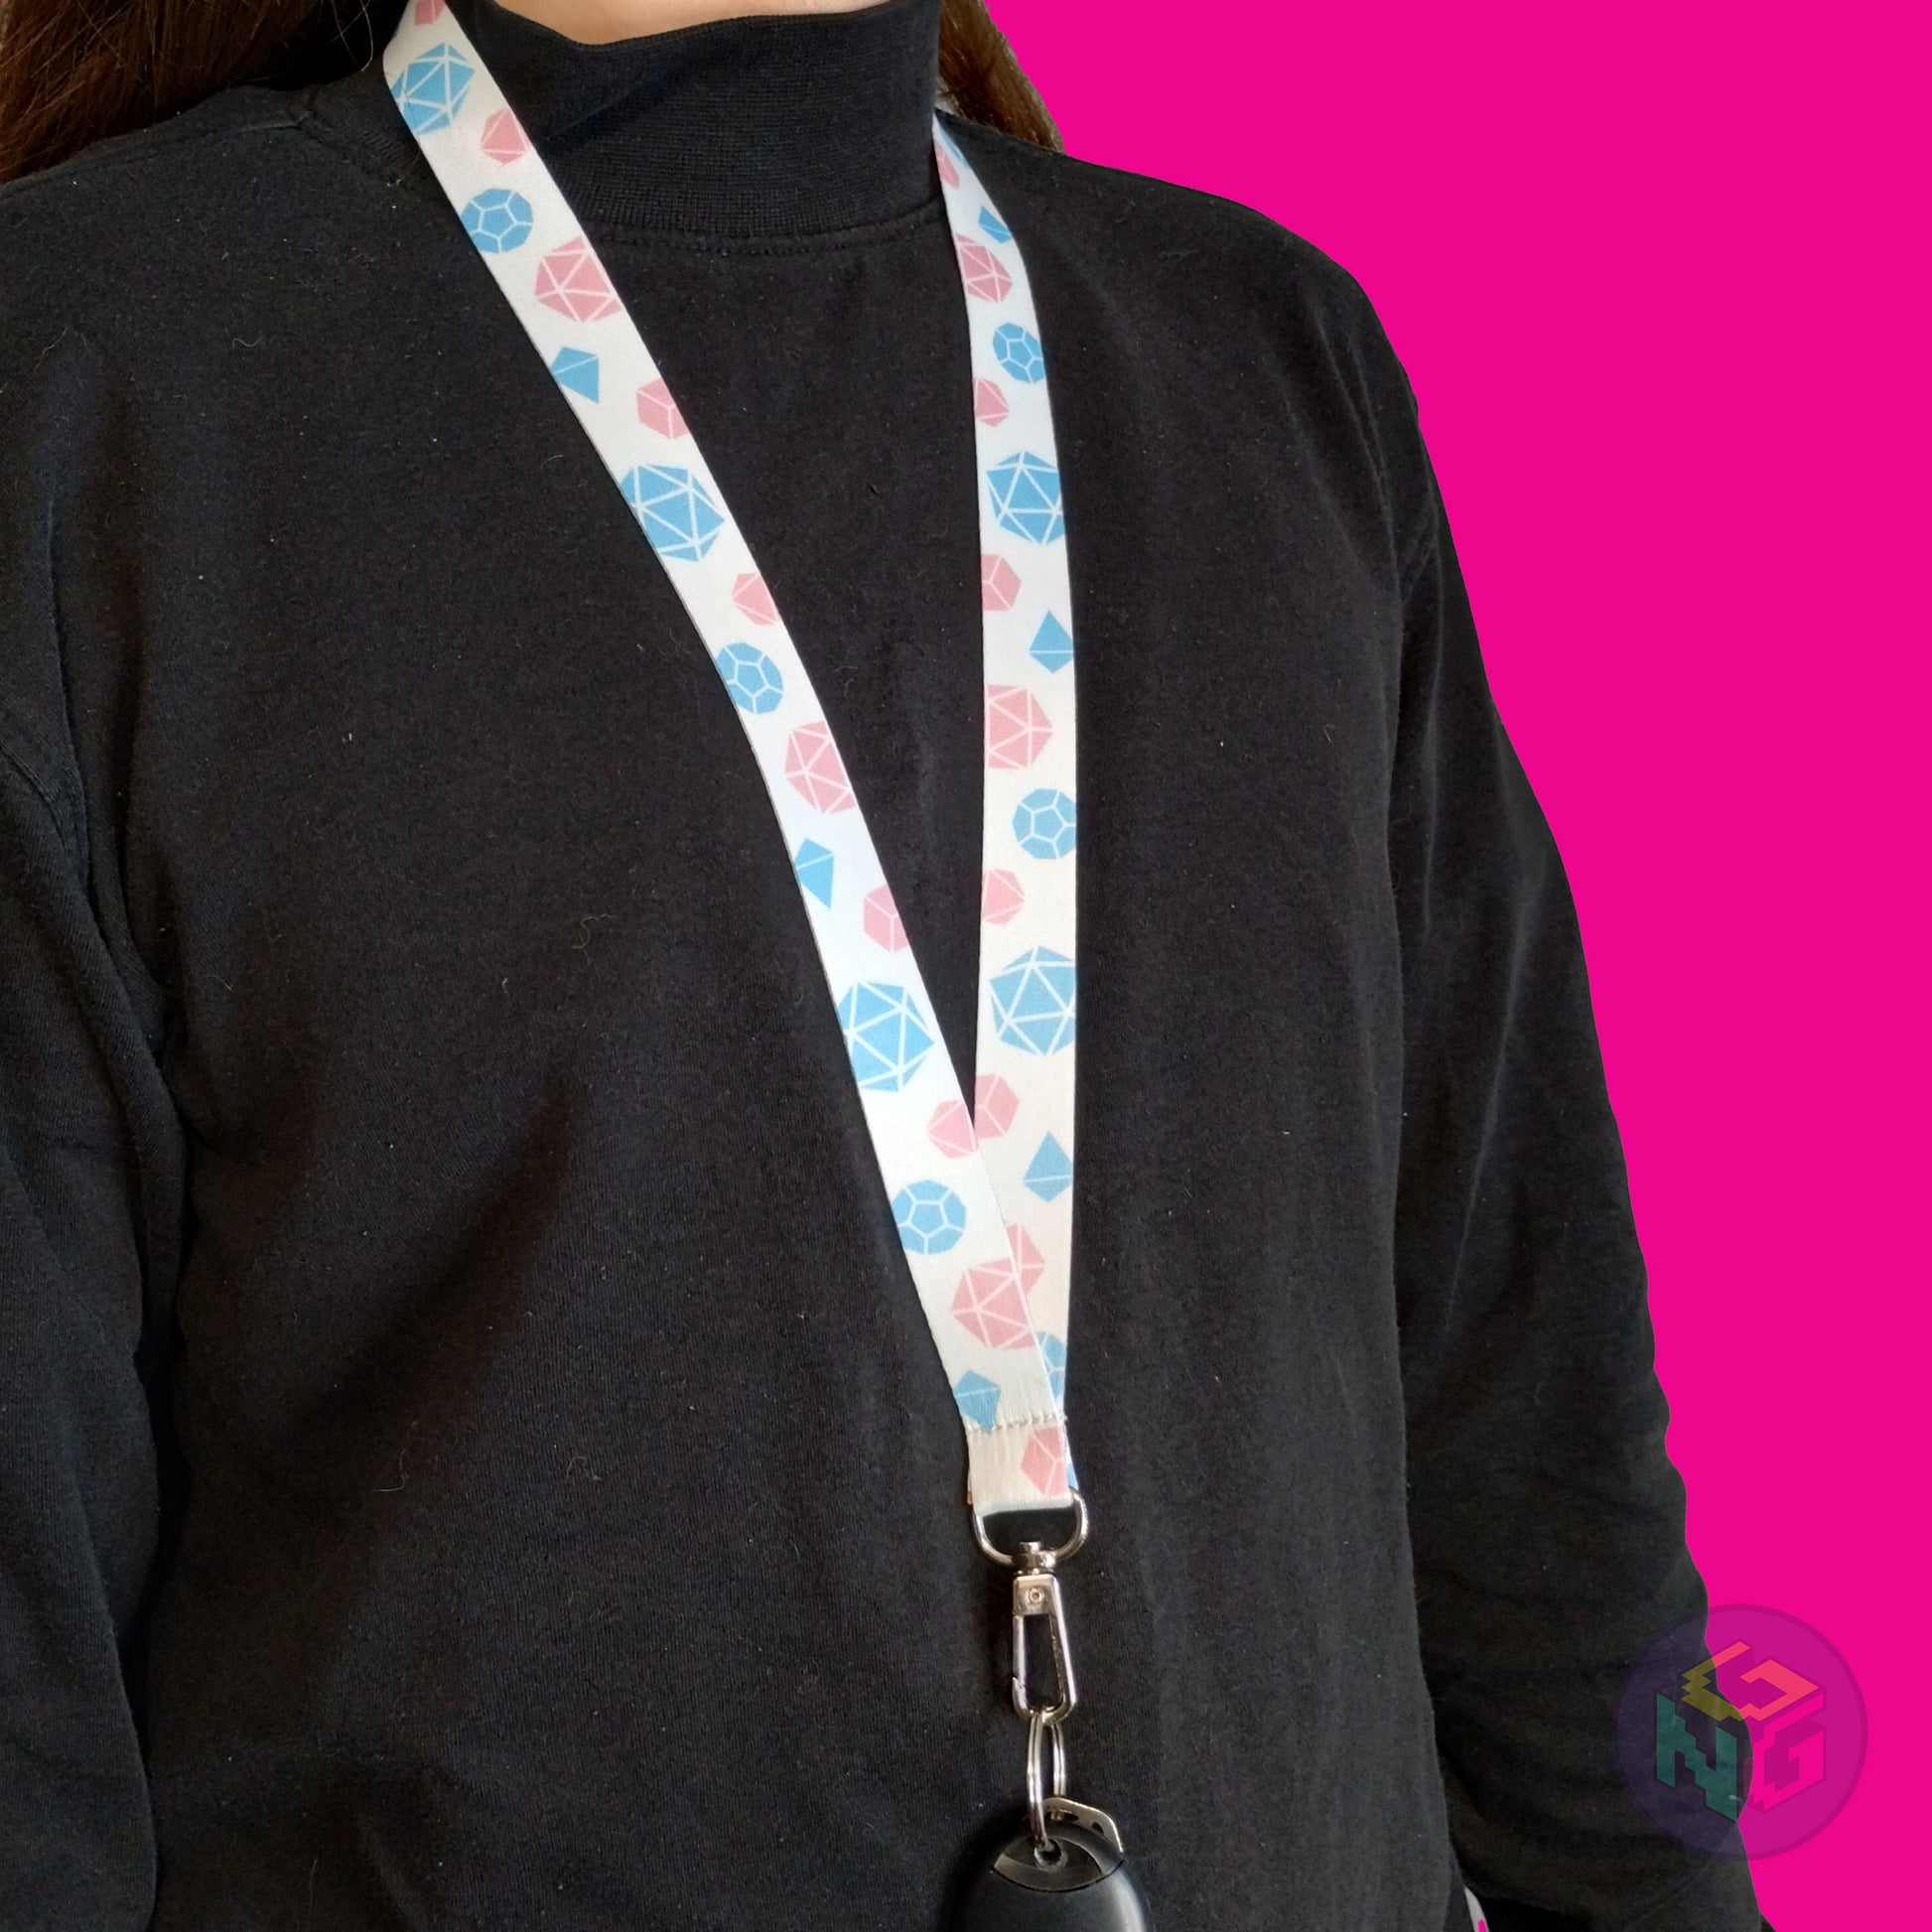 white transgender pride lanyard being worn by a flat chested person wearing a black turtleneck. The end of the lanyard falls between their sternum and bellybutton and has a key fob clipped to the end